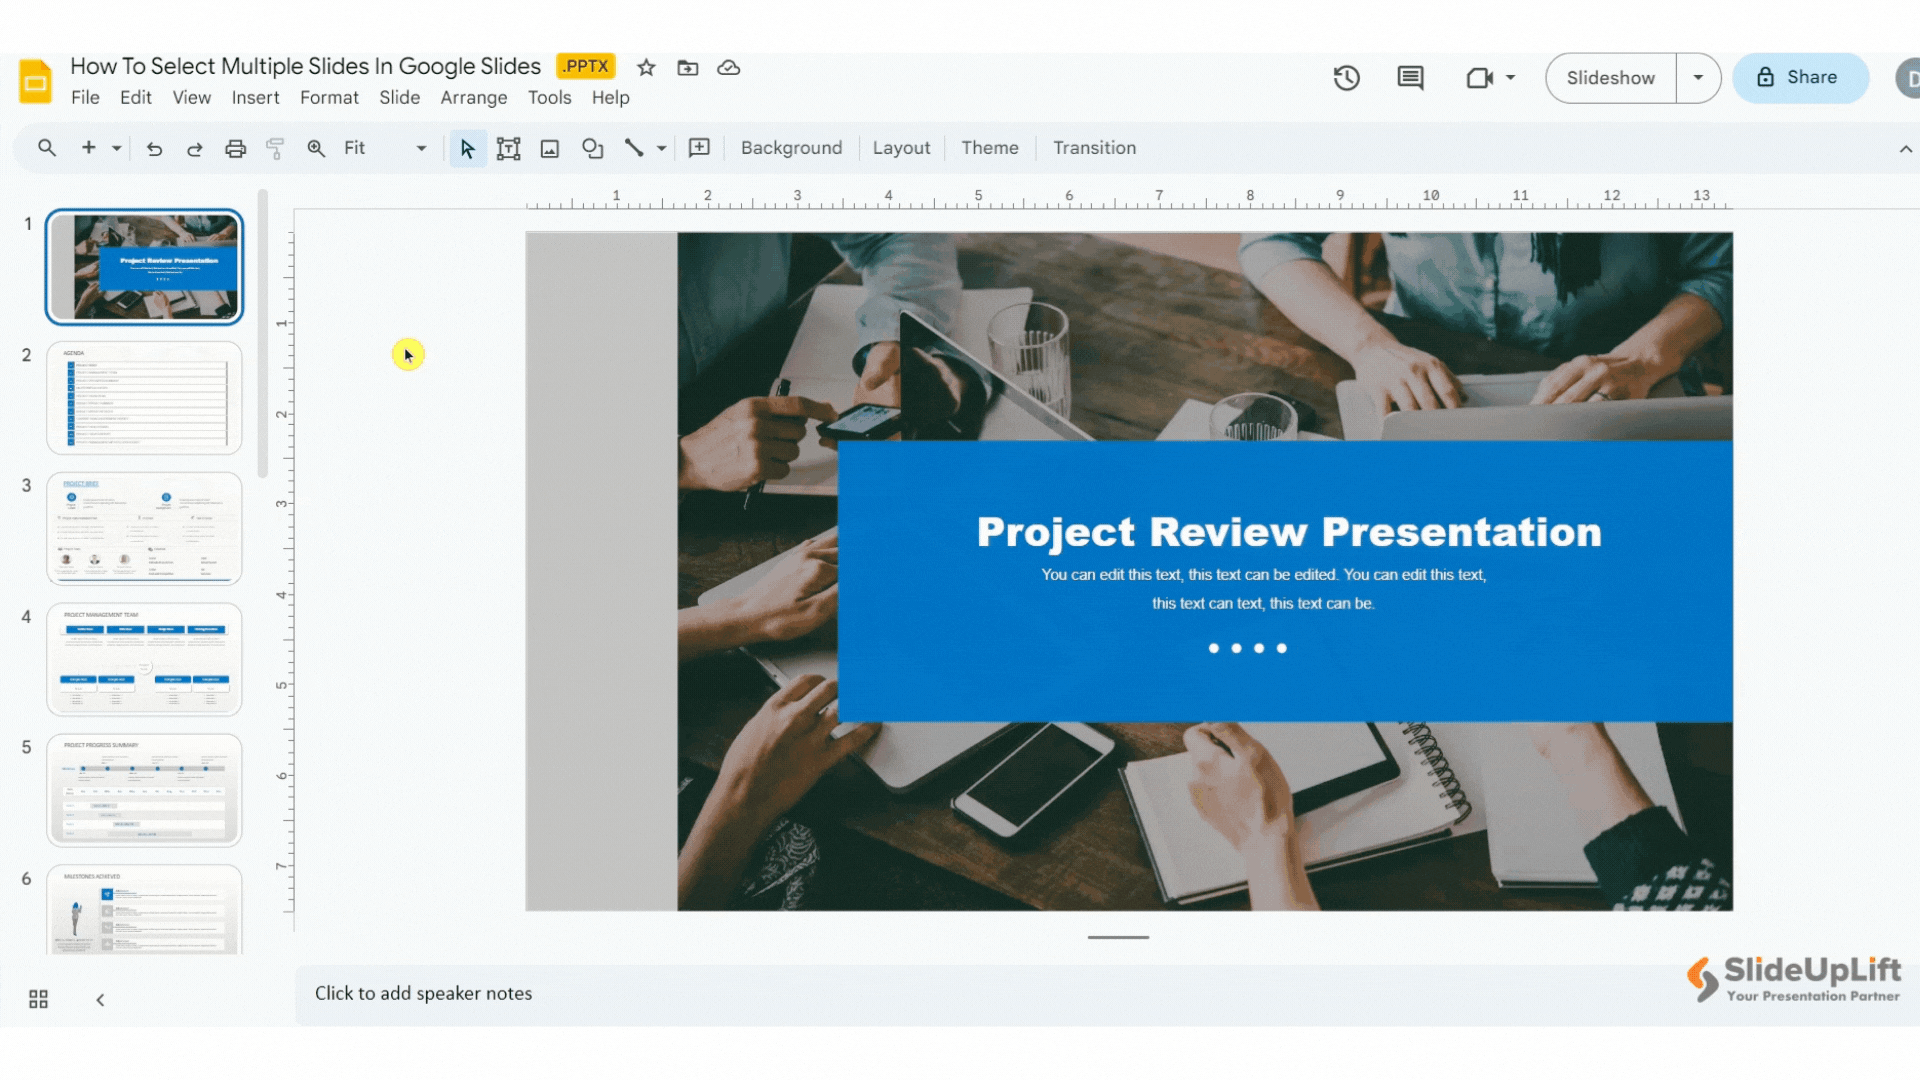 How to Select Multiple Slides in Google Slides Using Mouse